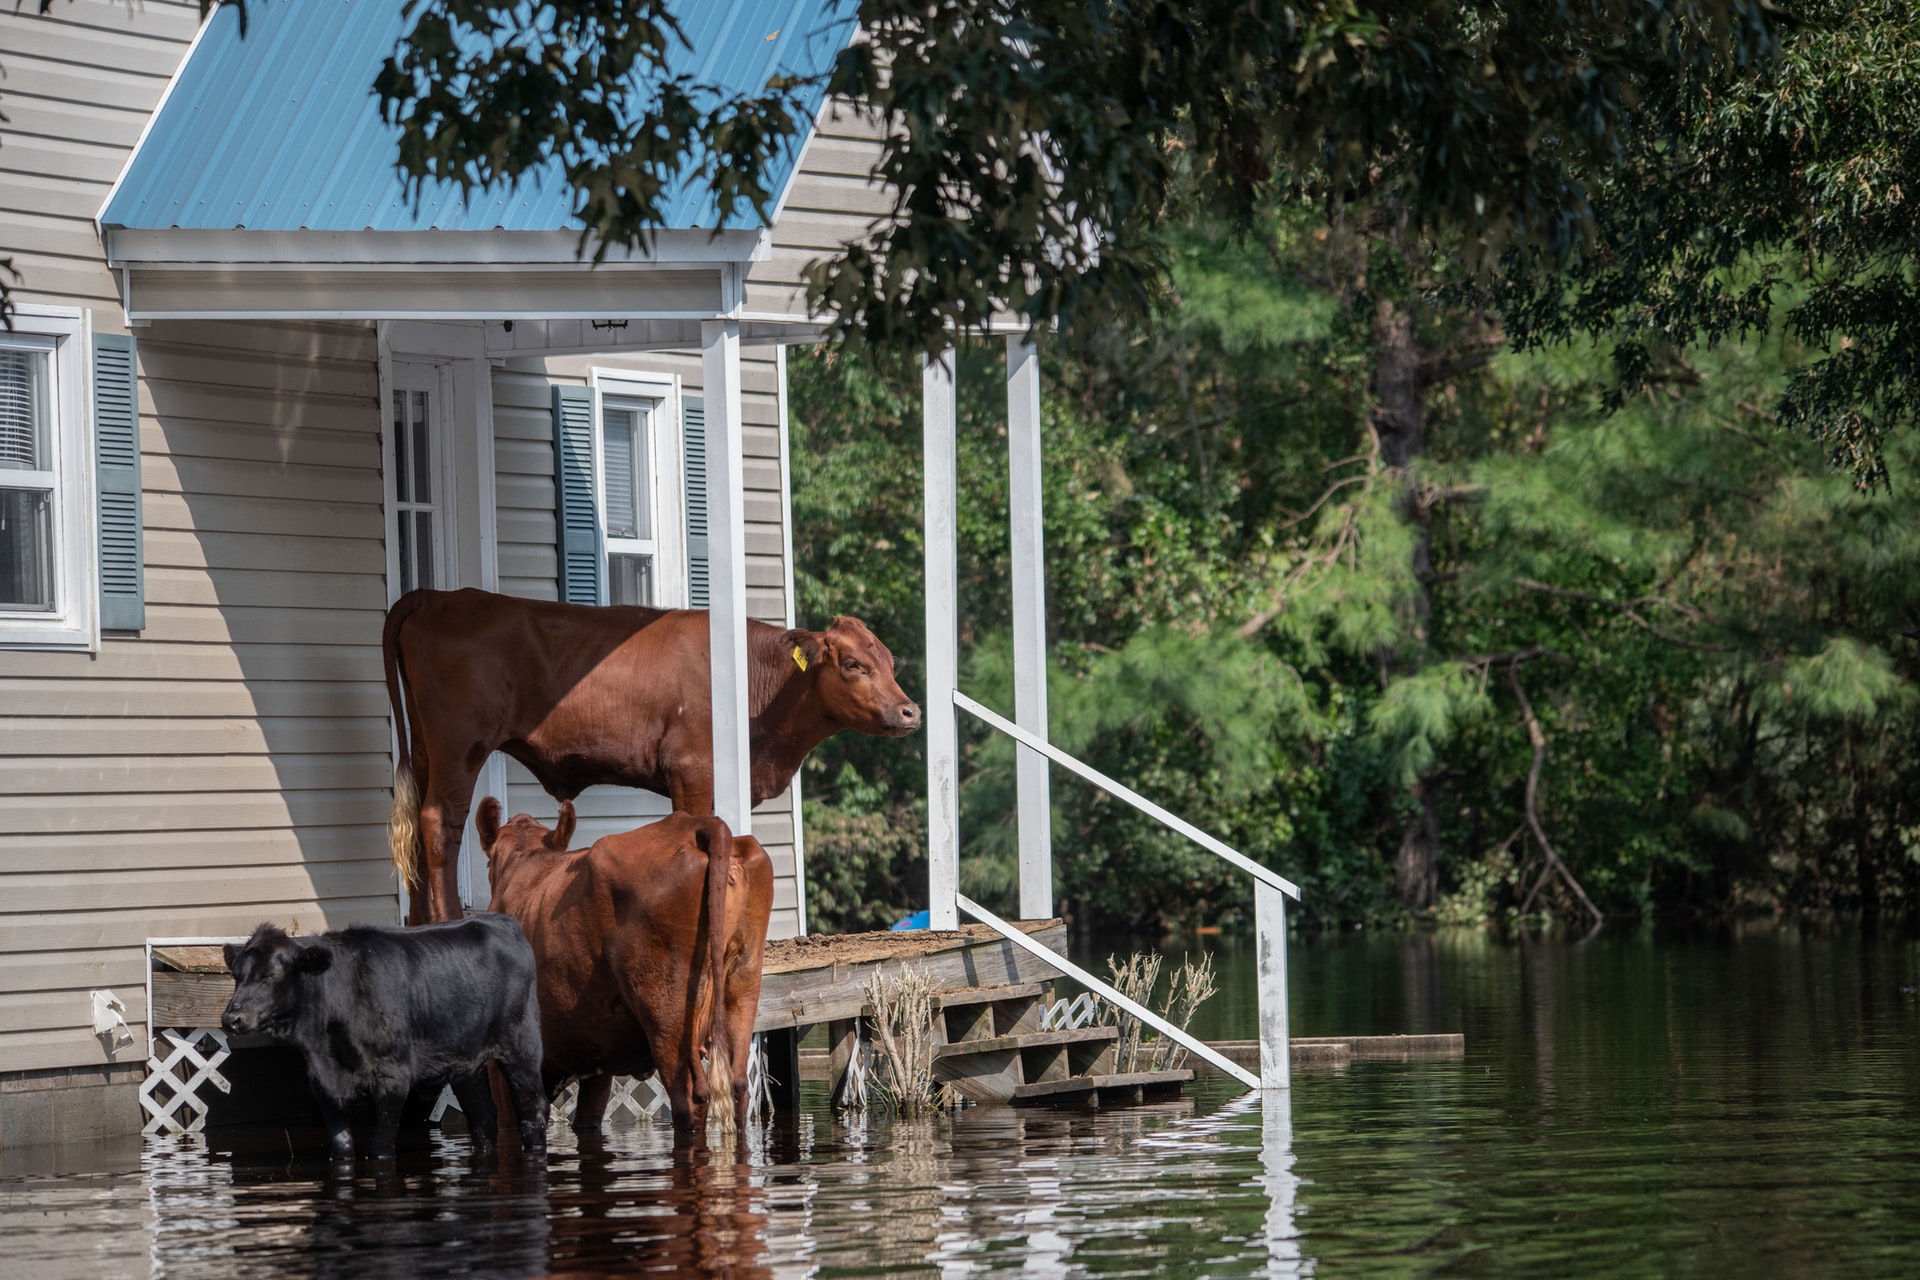 Th3 2021 IPCC report: Cows on porch surrounded by water.